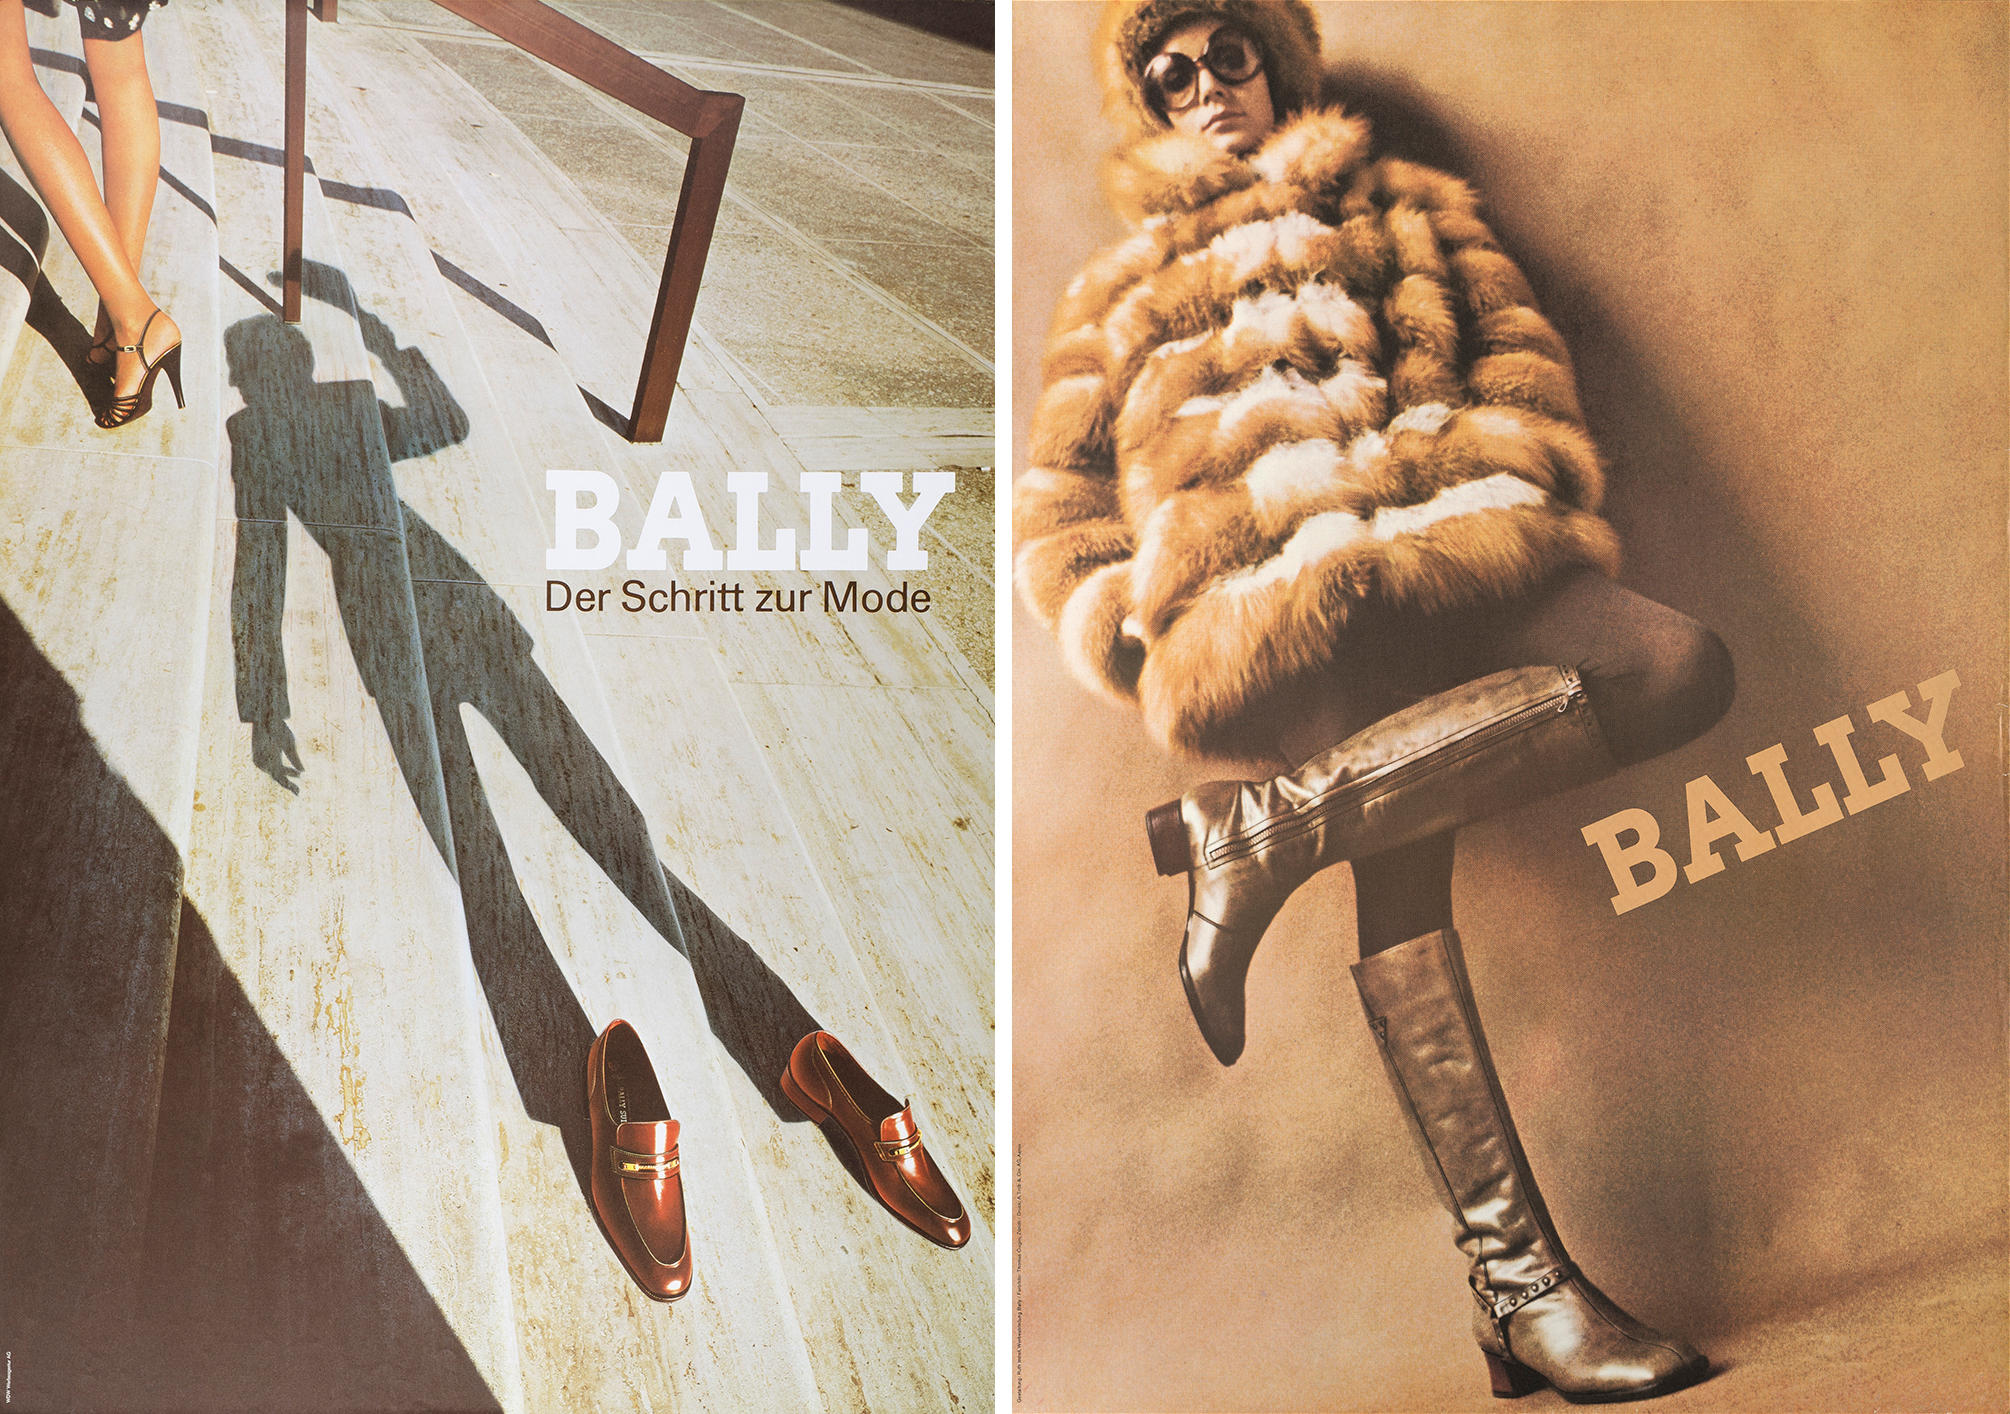 Bally posters